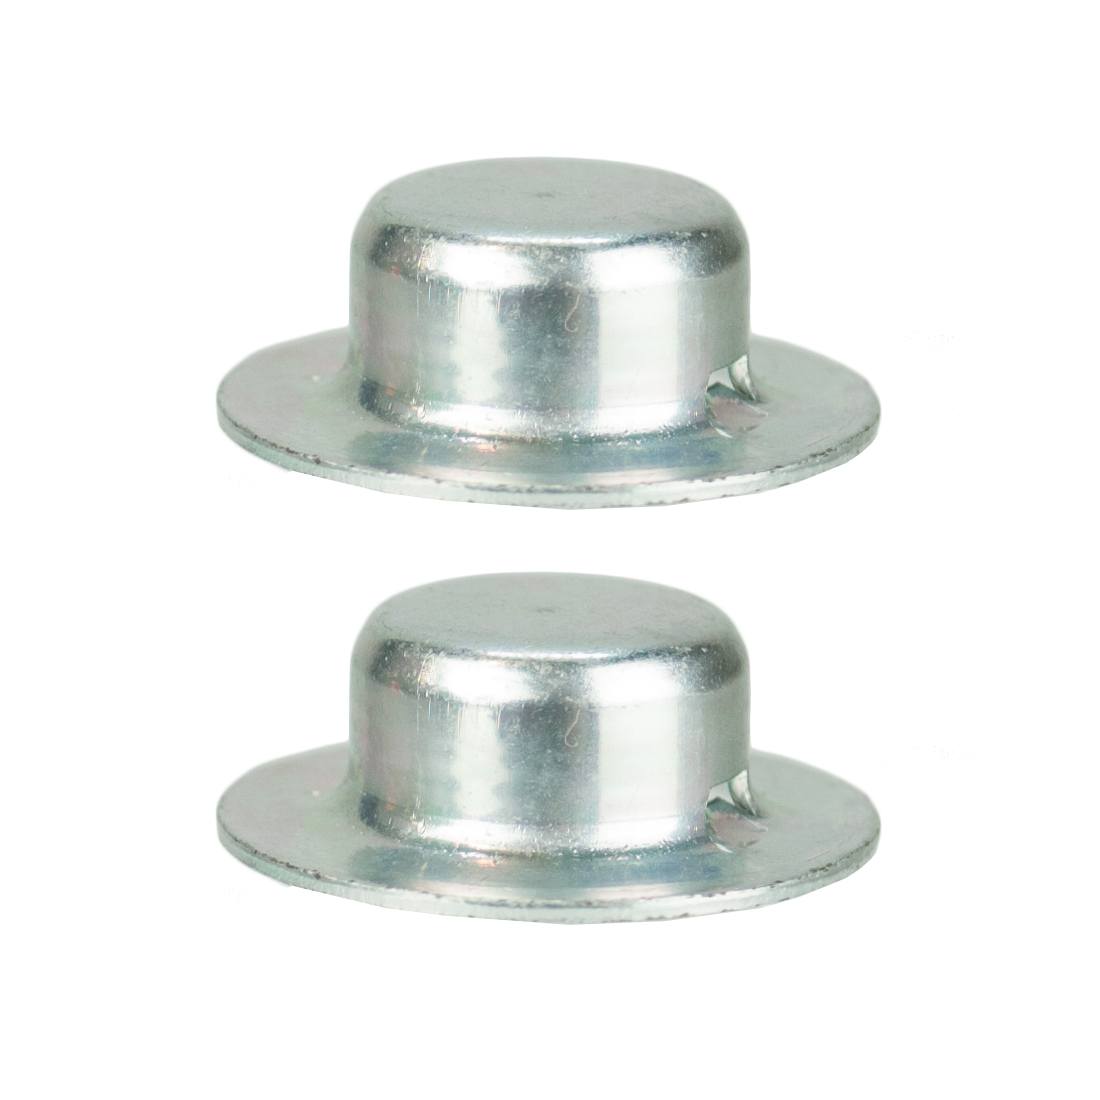 XERO Pure Legacy Replacement Axle Nuts - Set of Two - Stack View